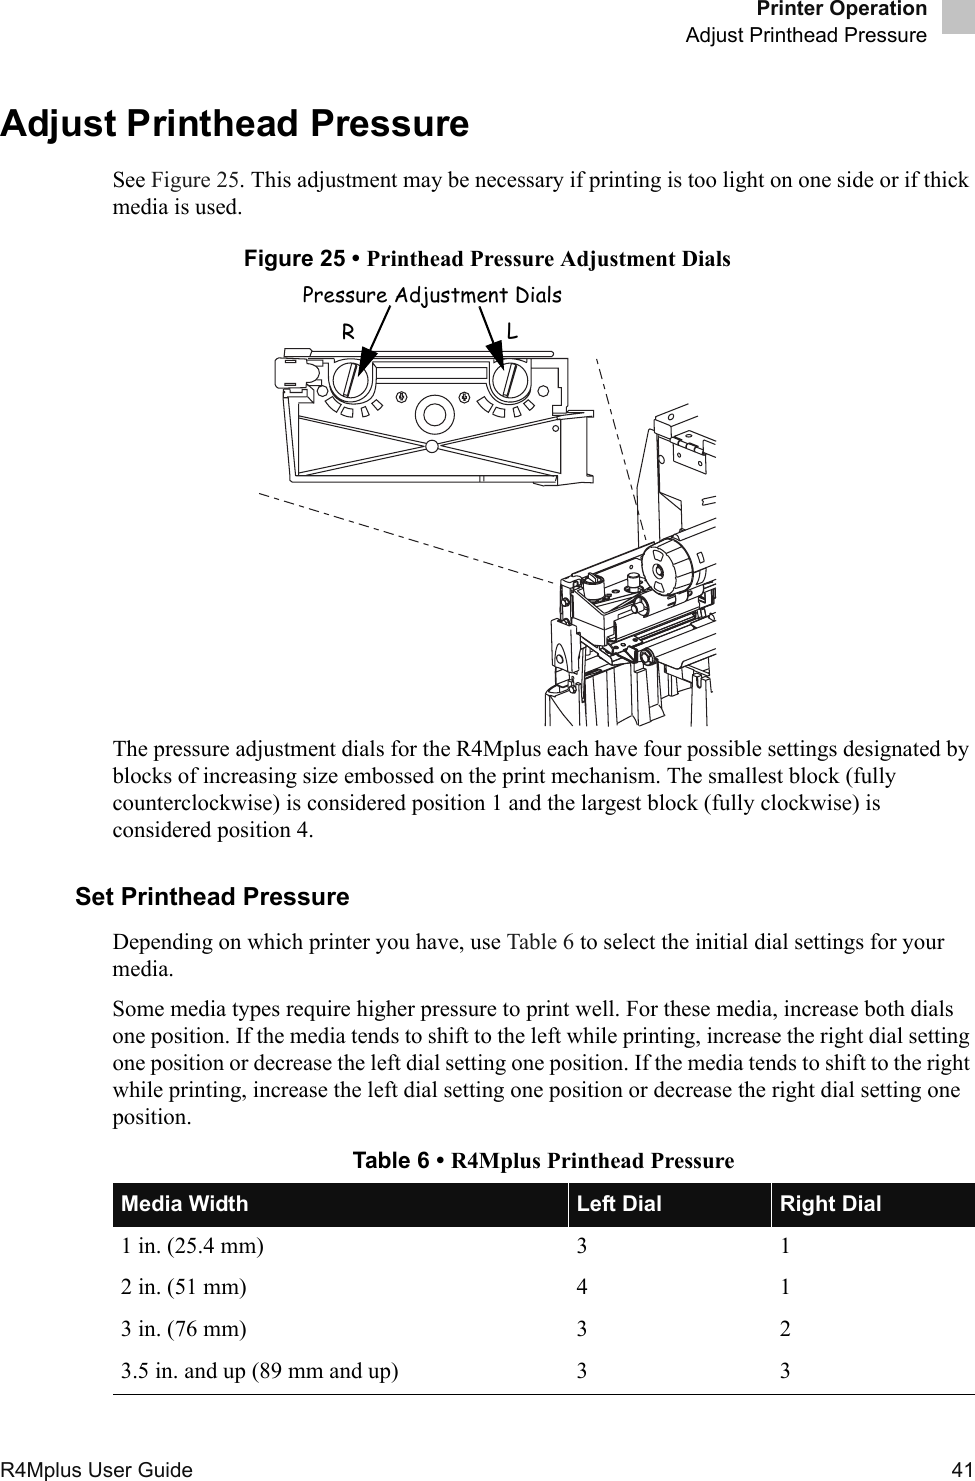 Printer OperationAdjust Printhead PressureR4Mplus User Guide  41Adjust Printhead PressureSee Figure 25. This adjustment may be necessary if printing is too light on one side or if thick media is used.Figure 25 • Printhead Pressure Adjustment DialsThe pressure adjustment dials for the R4Mplus each have four possible settings designated by blocks of increasing size embossed on the print mechanism. The smallest block (fully counterclockwise) is considered position 1 and the largest block (fully clockwise) is considered position 4.Set Printhead PressureDepending on which printer you have, use Table 6 to select the initial dial settings for your media.Some media types require higher pressure to print well. For these media, increase both dials one position. If the media tends to shift to the left while printing, increase the right dial setting one position or decrease the left dial setting one position. If the media tends to shift to the right while printing, increase the left dial setting one position or decrease the right dial setting one position.Table 6 • R4Mplus Printhead PressureMedia Width Left Dial Right Dial1 in. (25.4 mm) 3 12 in. (51 mm) 4 13 in. (76 mm) 3 23.5 in. and up (89 mm and up) 3 3Pressure Adjustment DialsRL